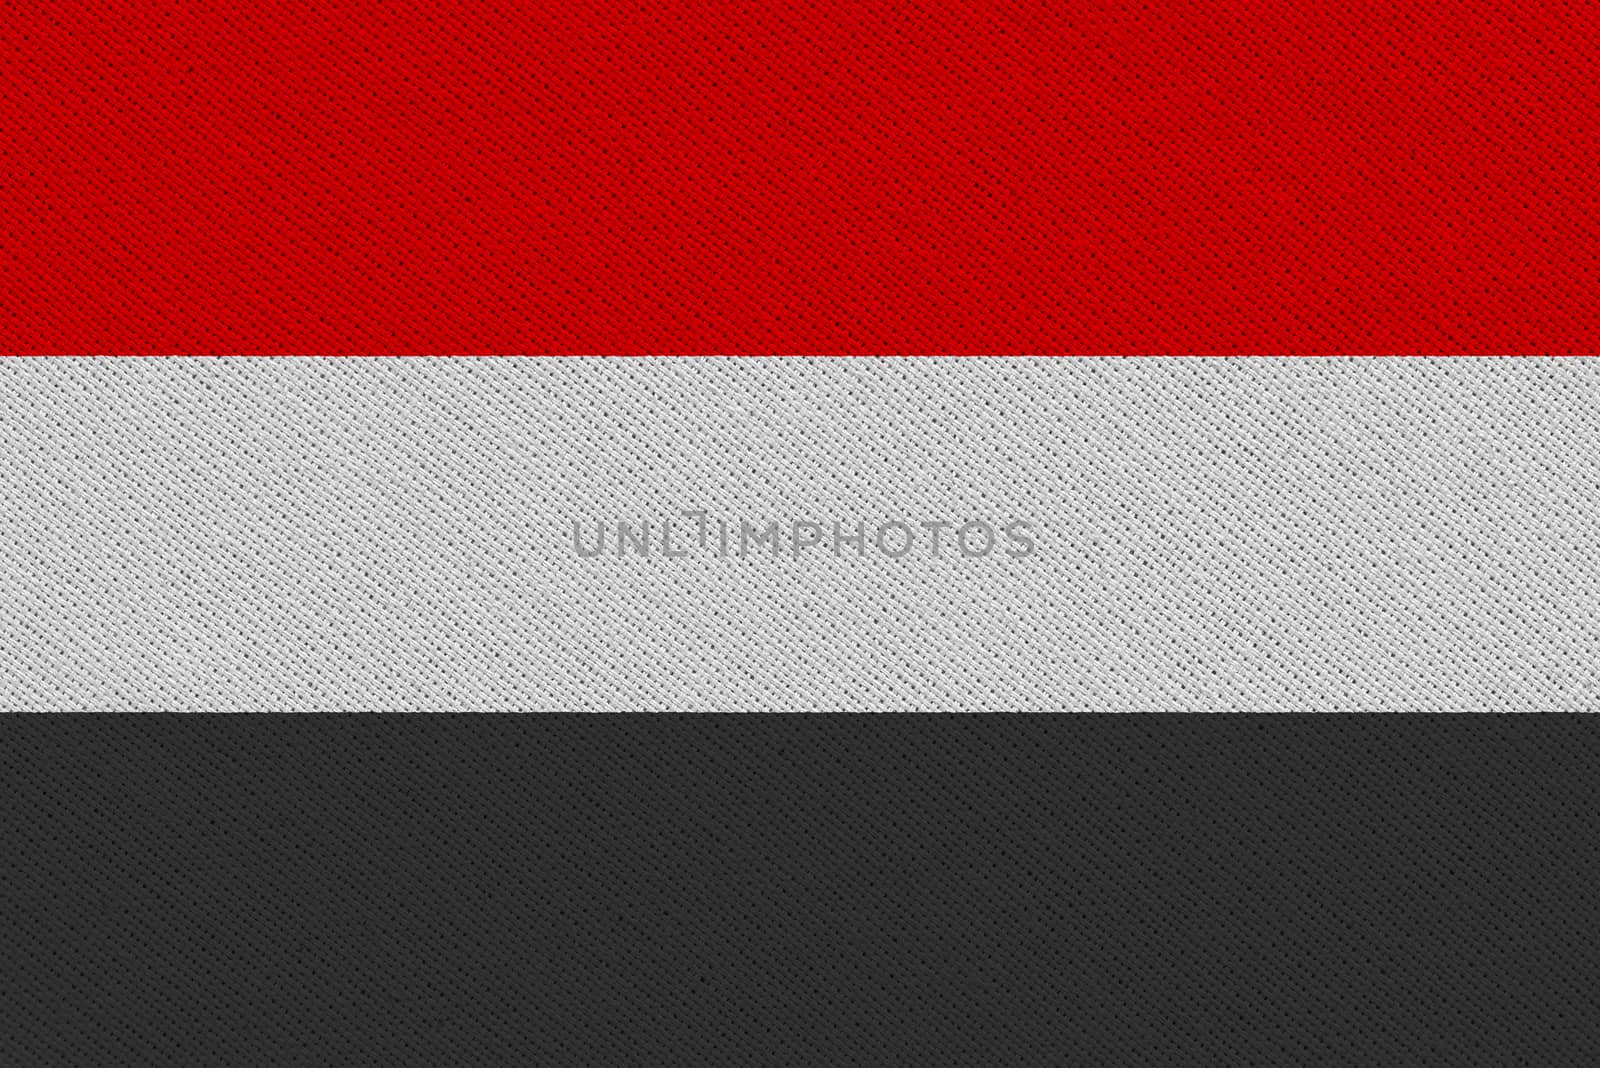 yemen fabric flag by Visual-Content